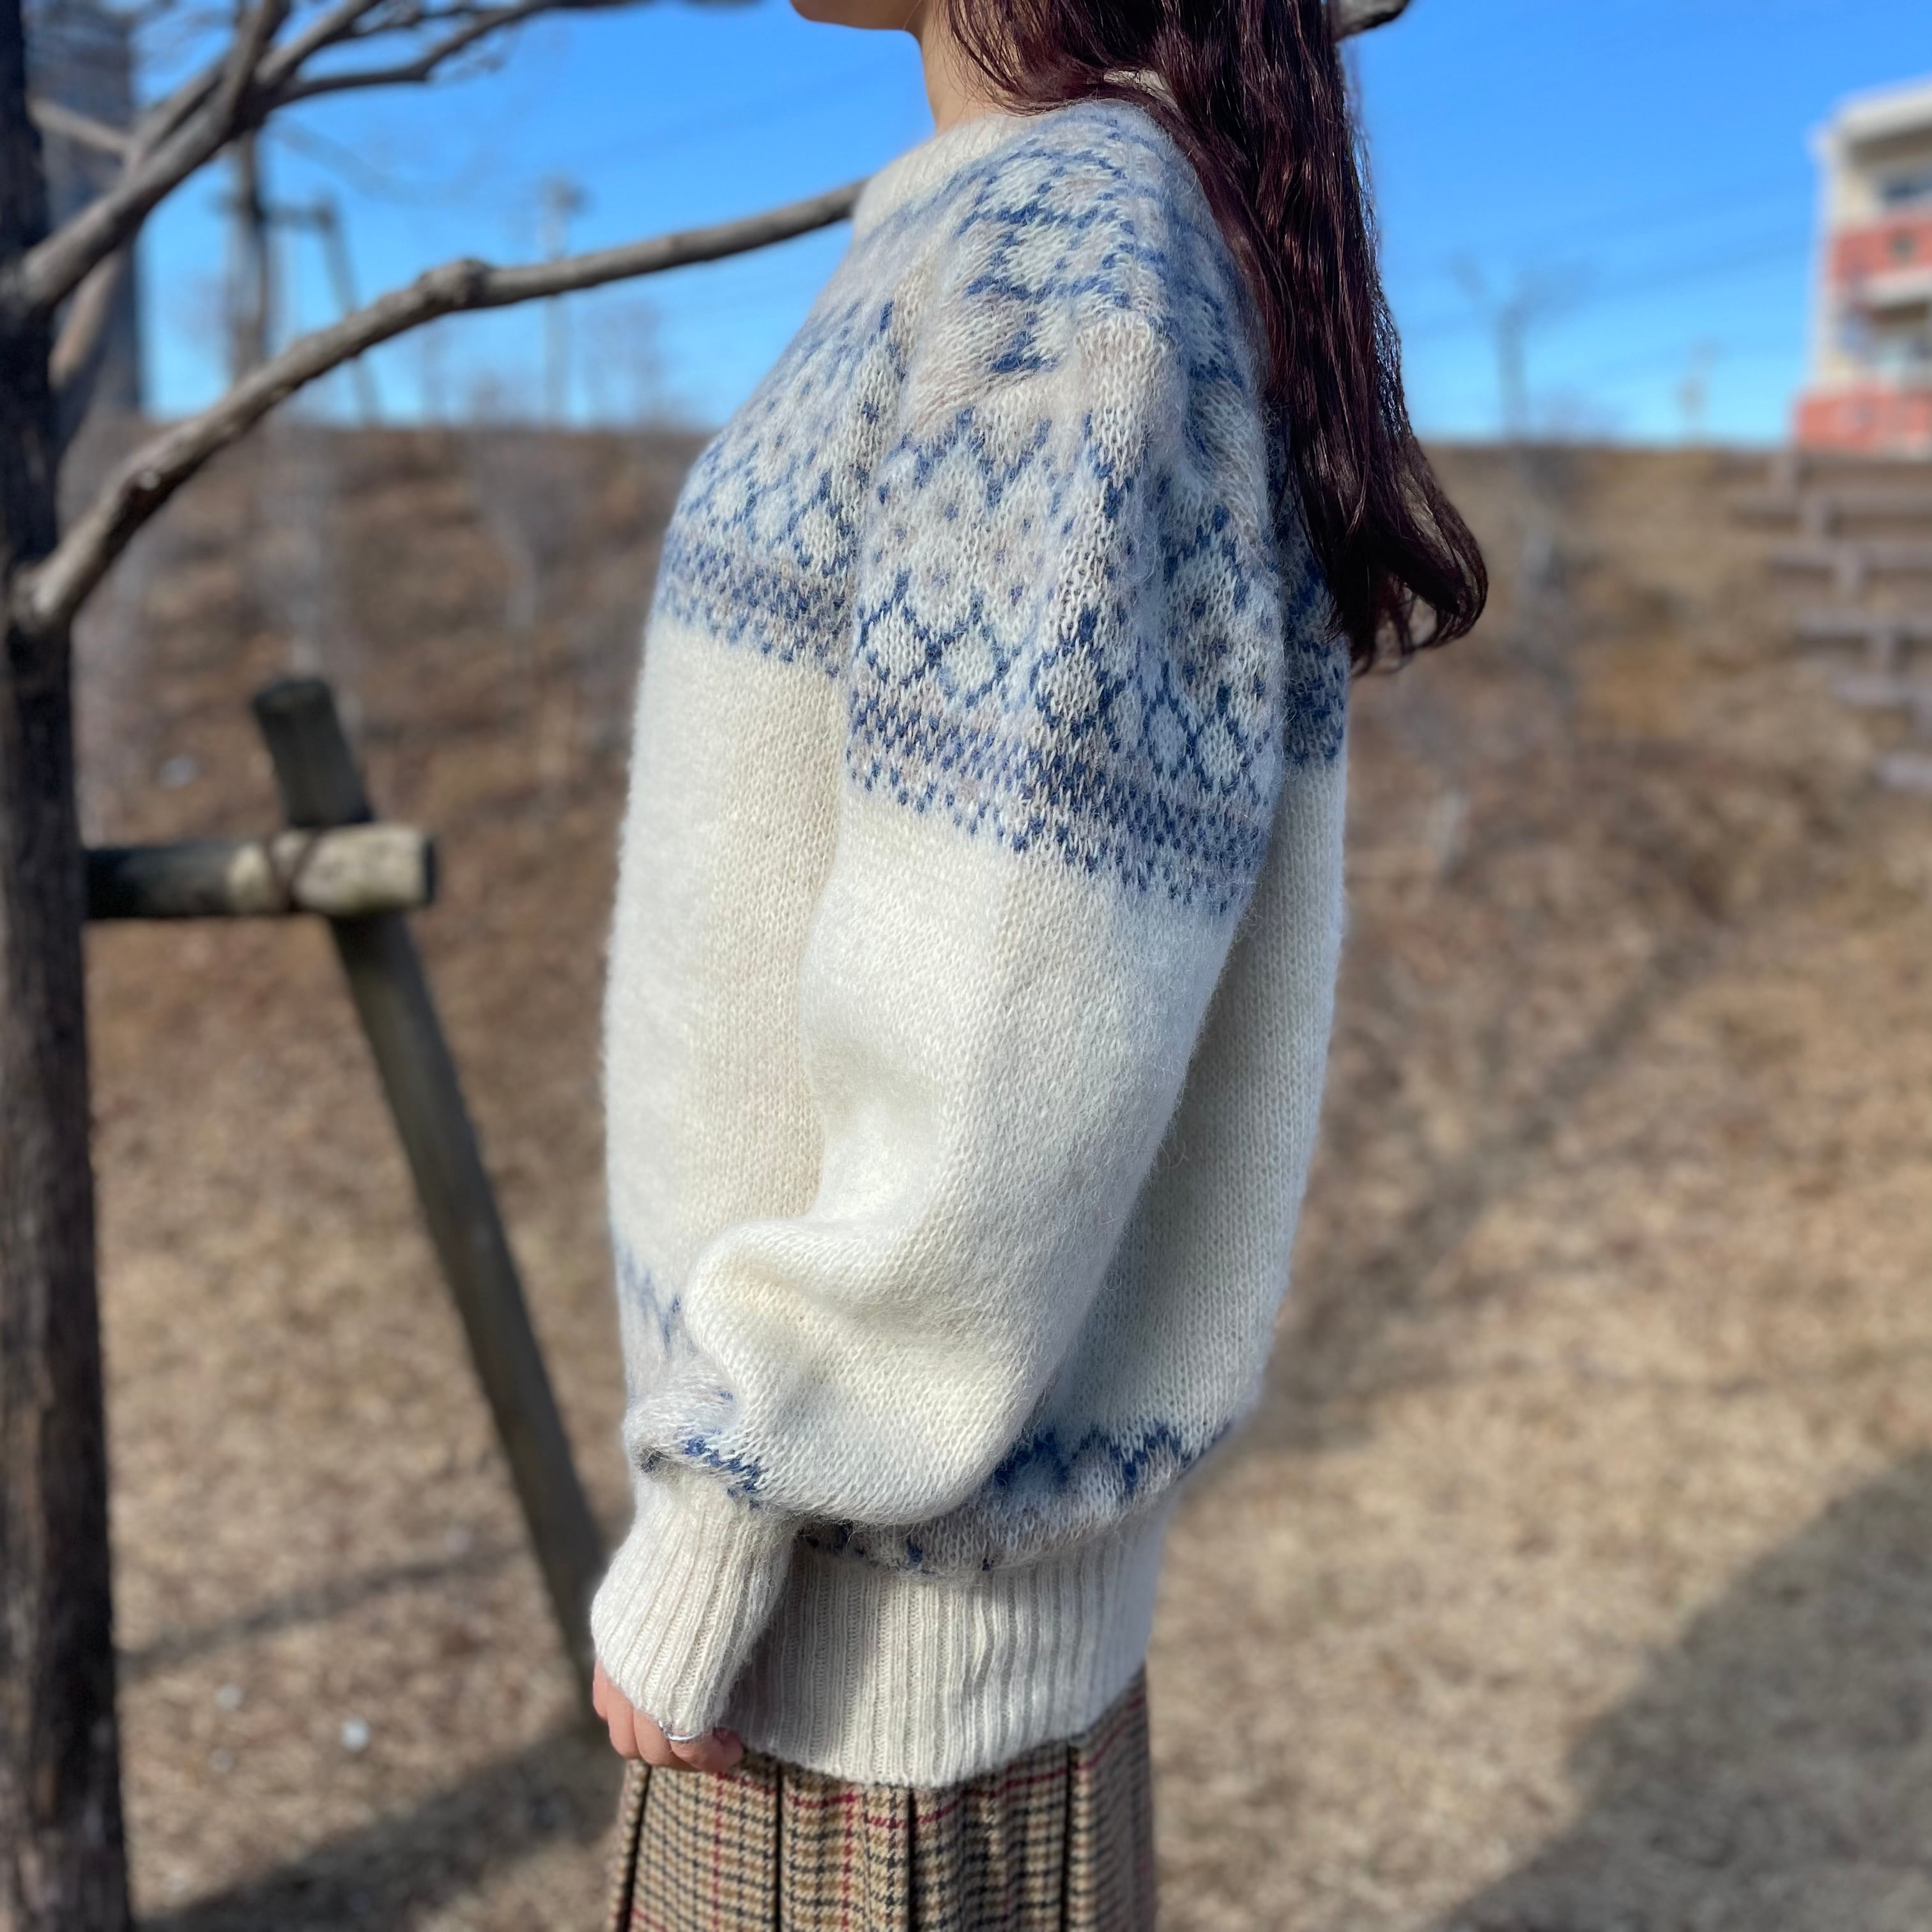 Nordic patterned knit sweater ニットセーター 古着 ノルディック柄 ...